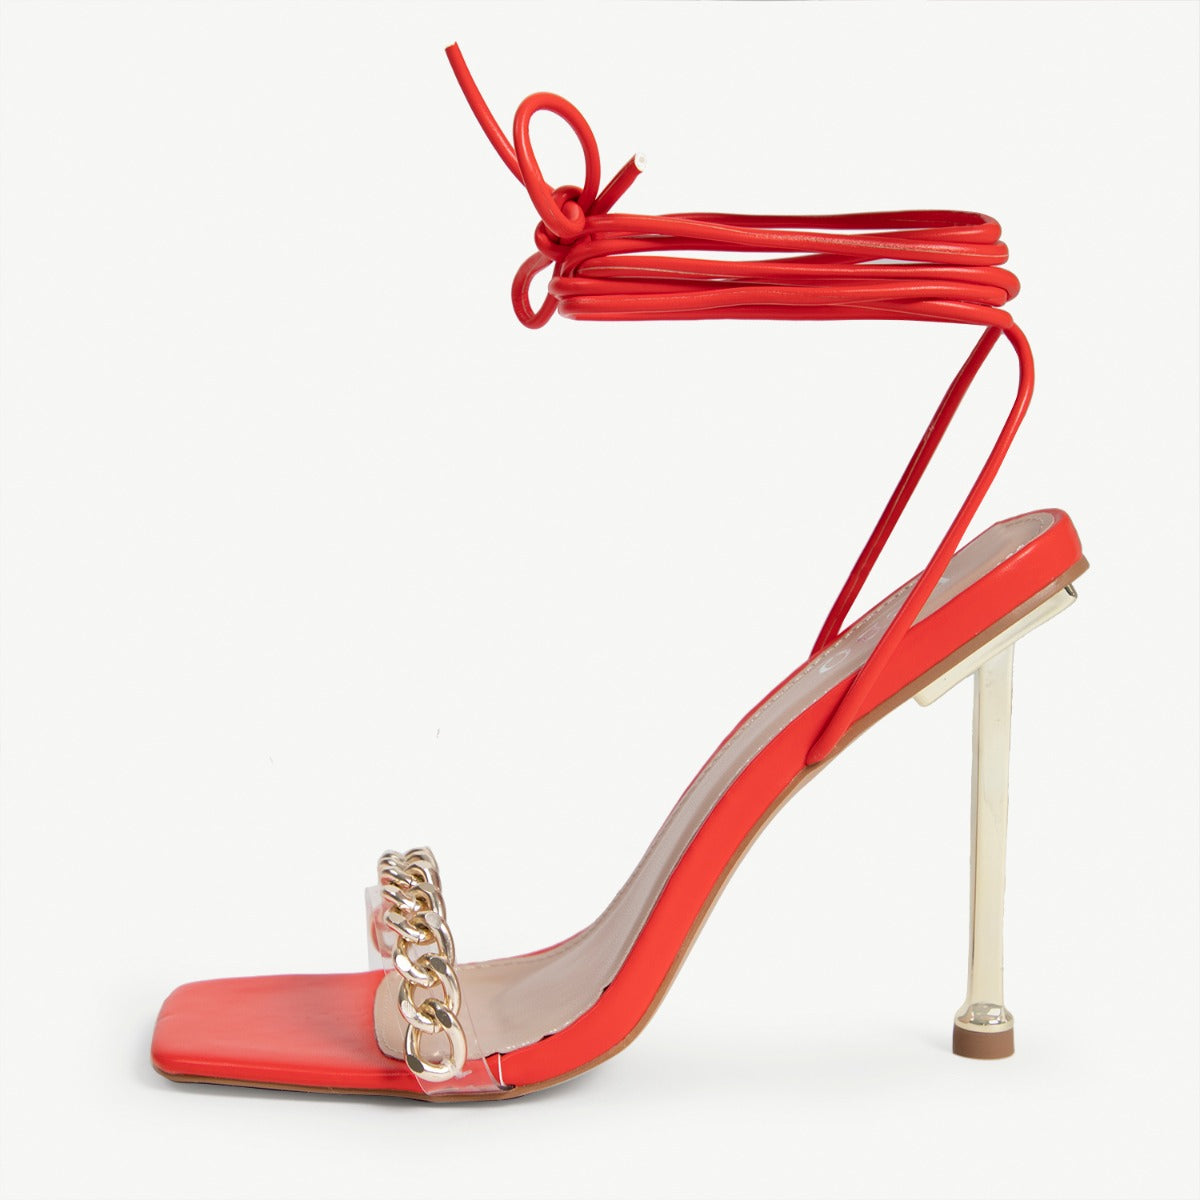 BEBO Tisha Lace Up Heel in Red